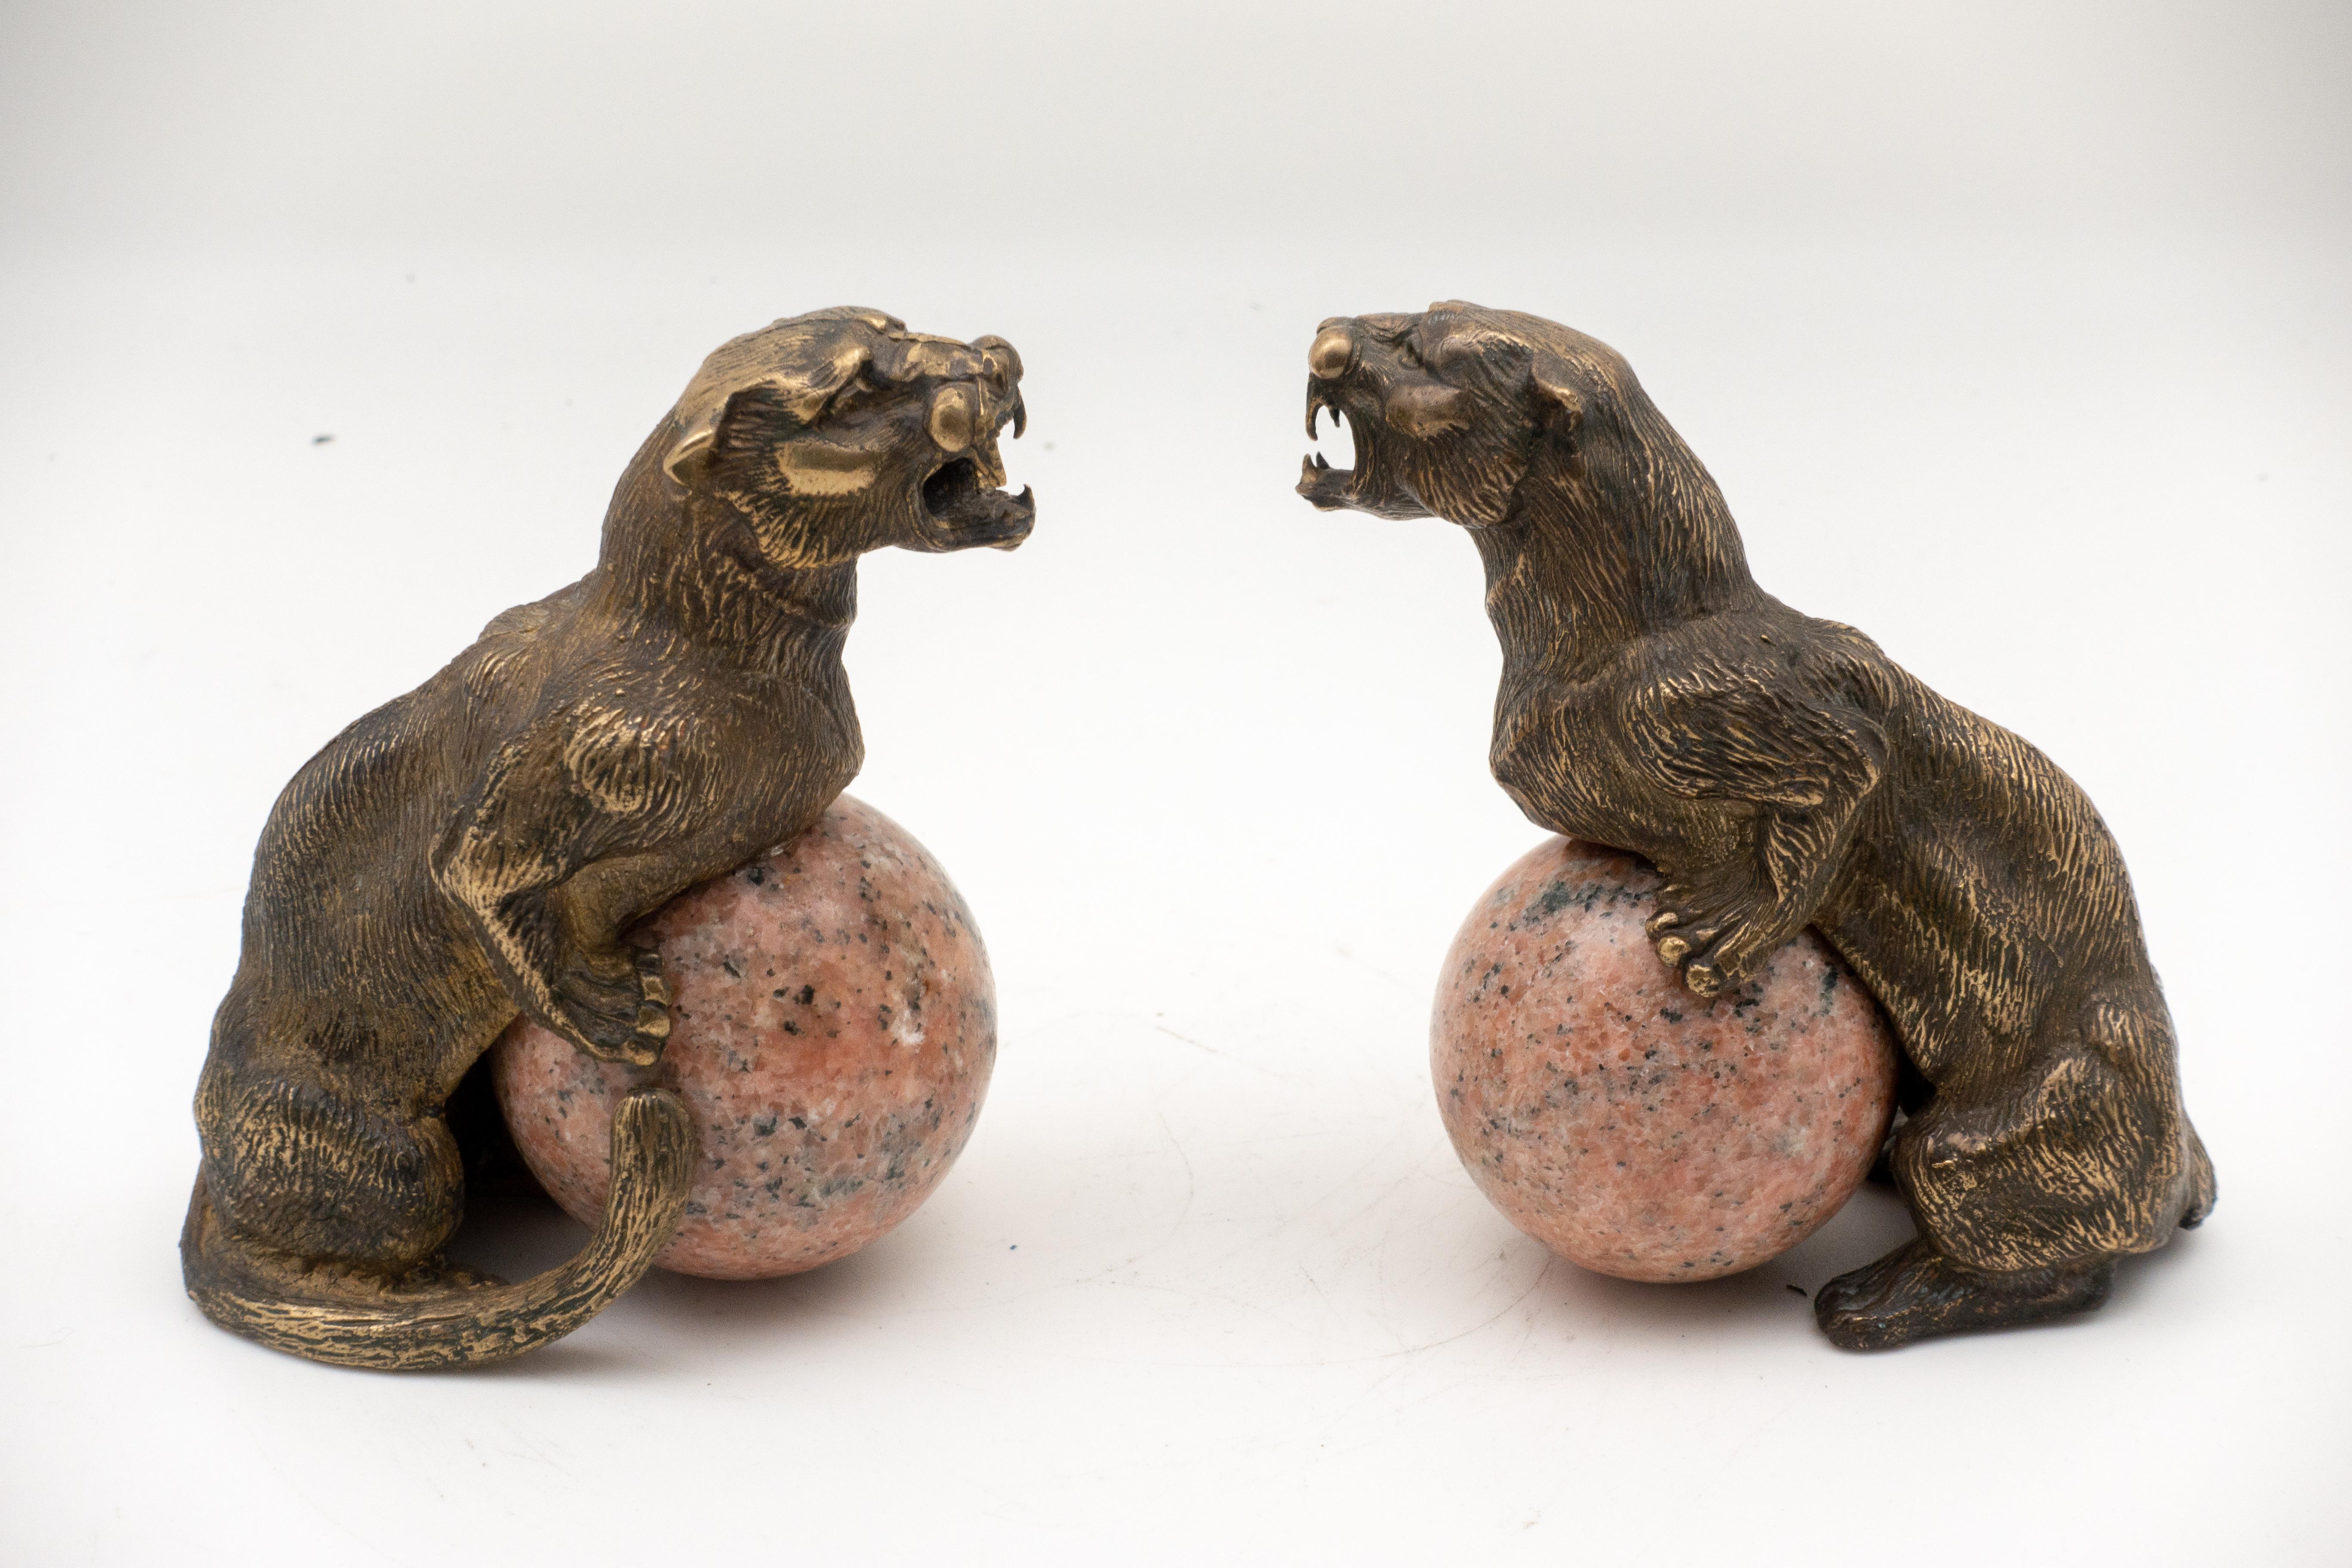 Pair of bronze panthers fitted to hold marble spheres (included); depicted with forelegs perched on sphere, roaring. Antique pair from France, 19th century.